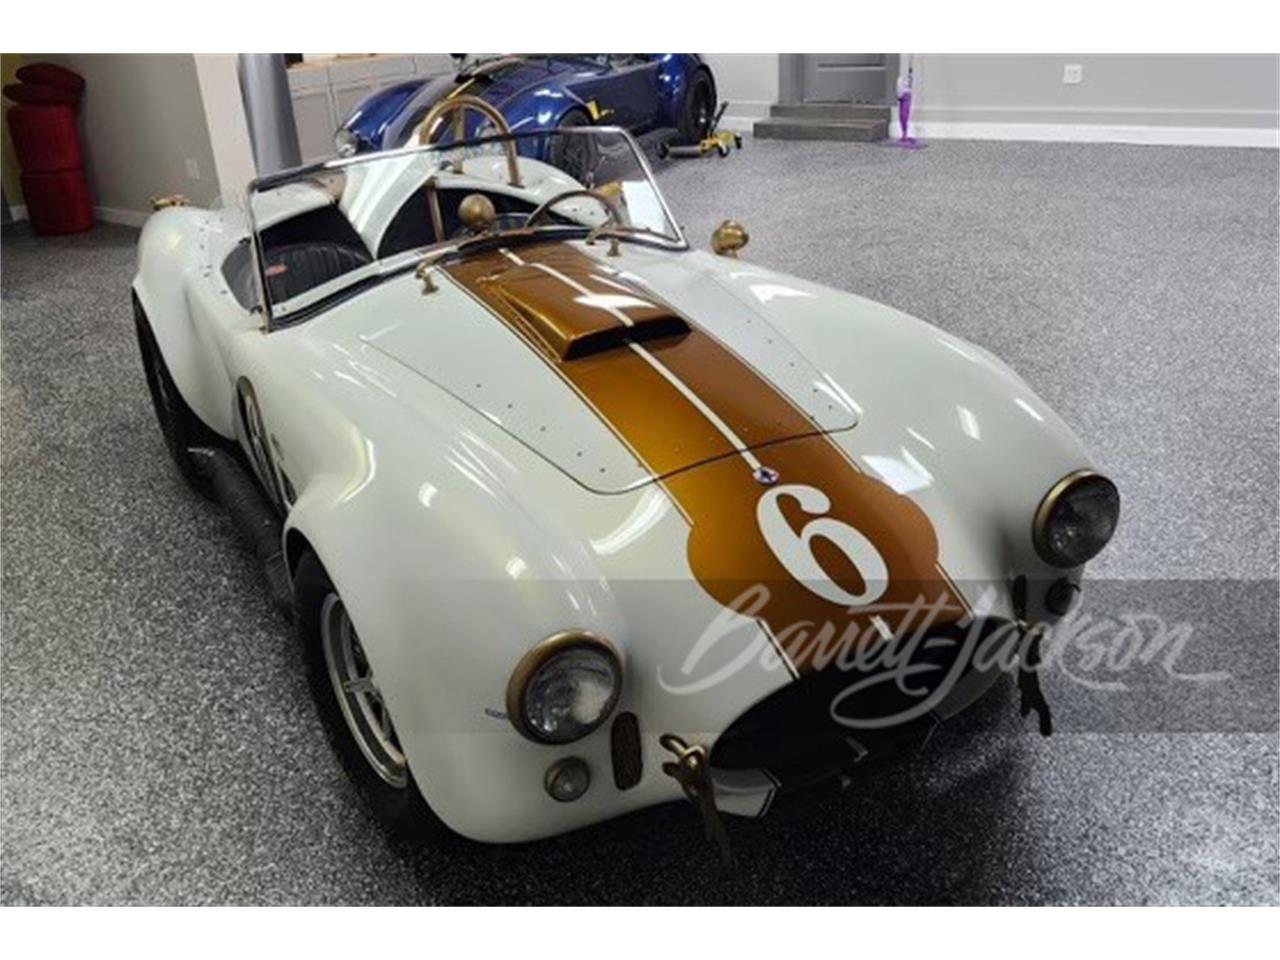 For Sale at Auction: 1965 Shelby Cobra Replica in Scottsdale, Arizona for sale in Scottsdale, AZ